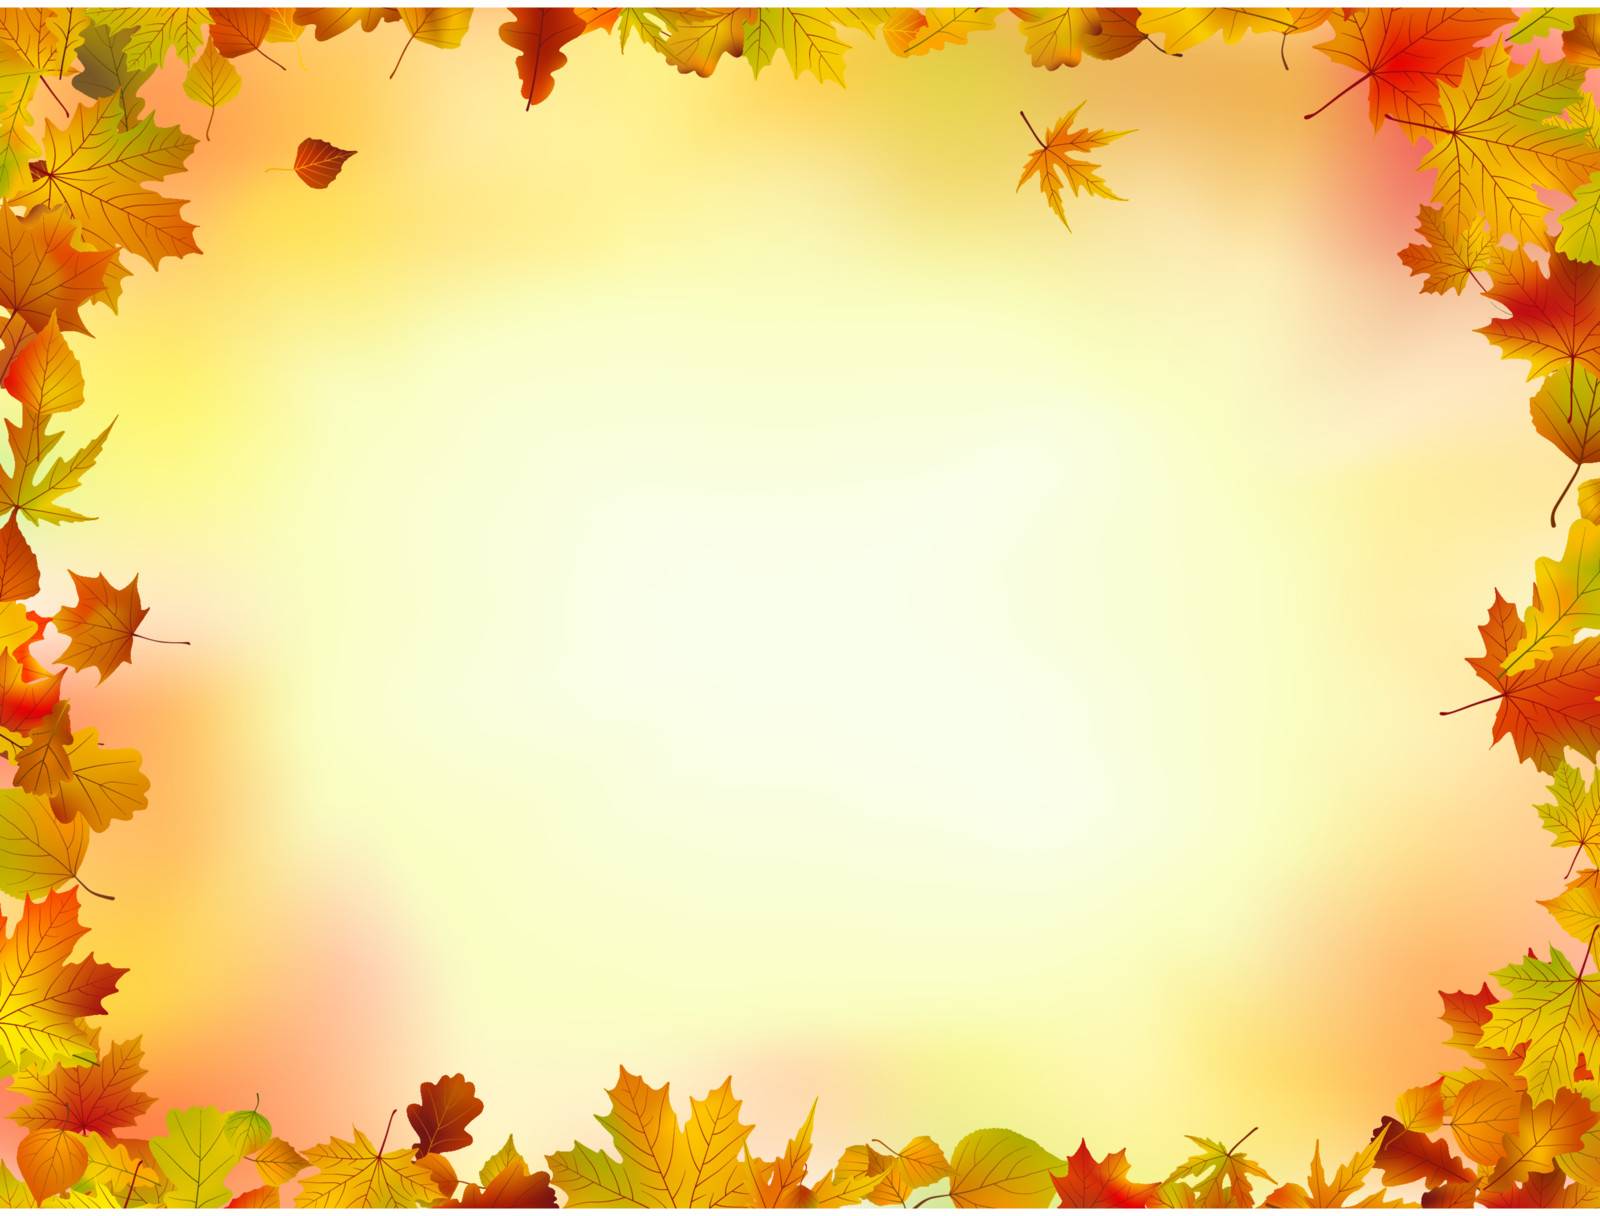 Fall leaves frame with copyspace background. EPS 8